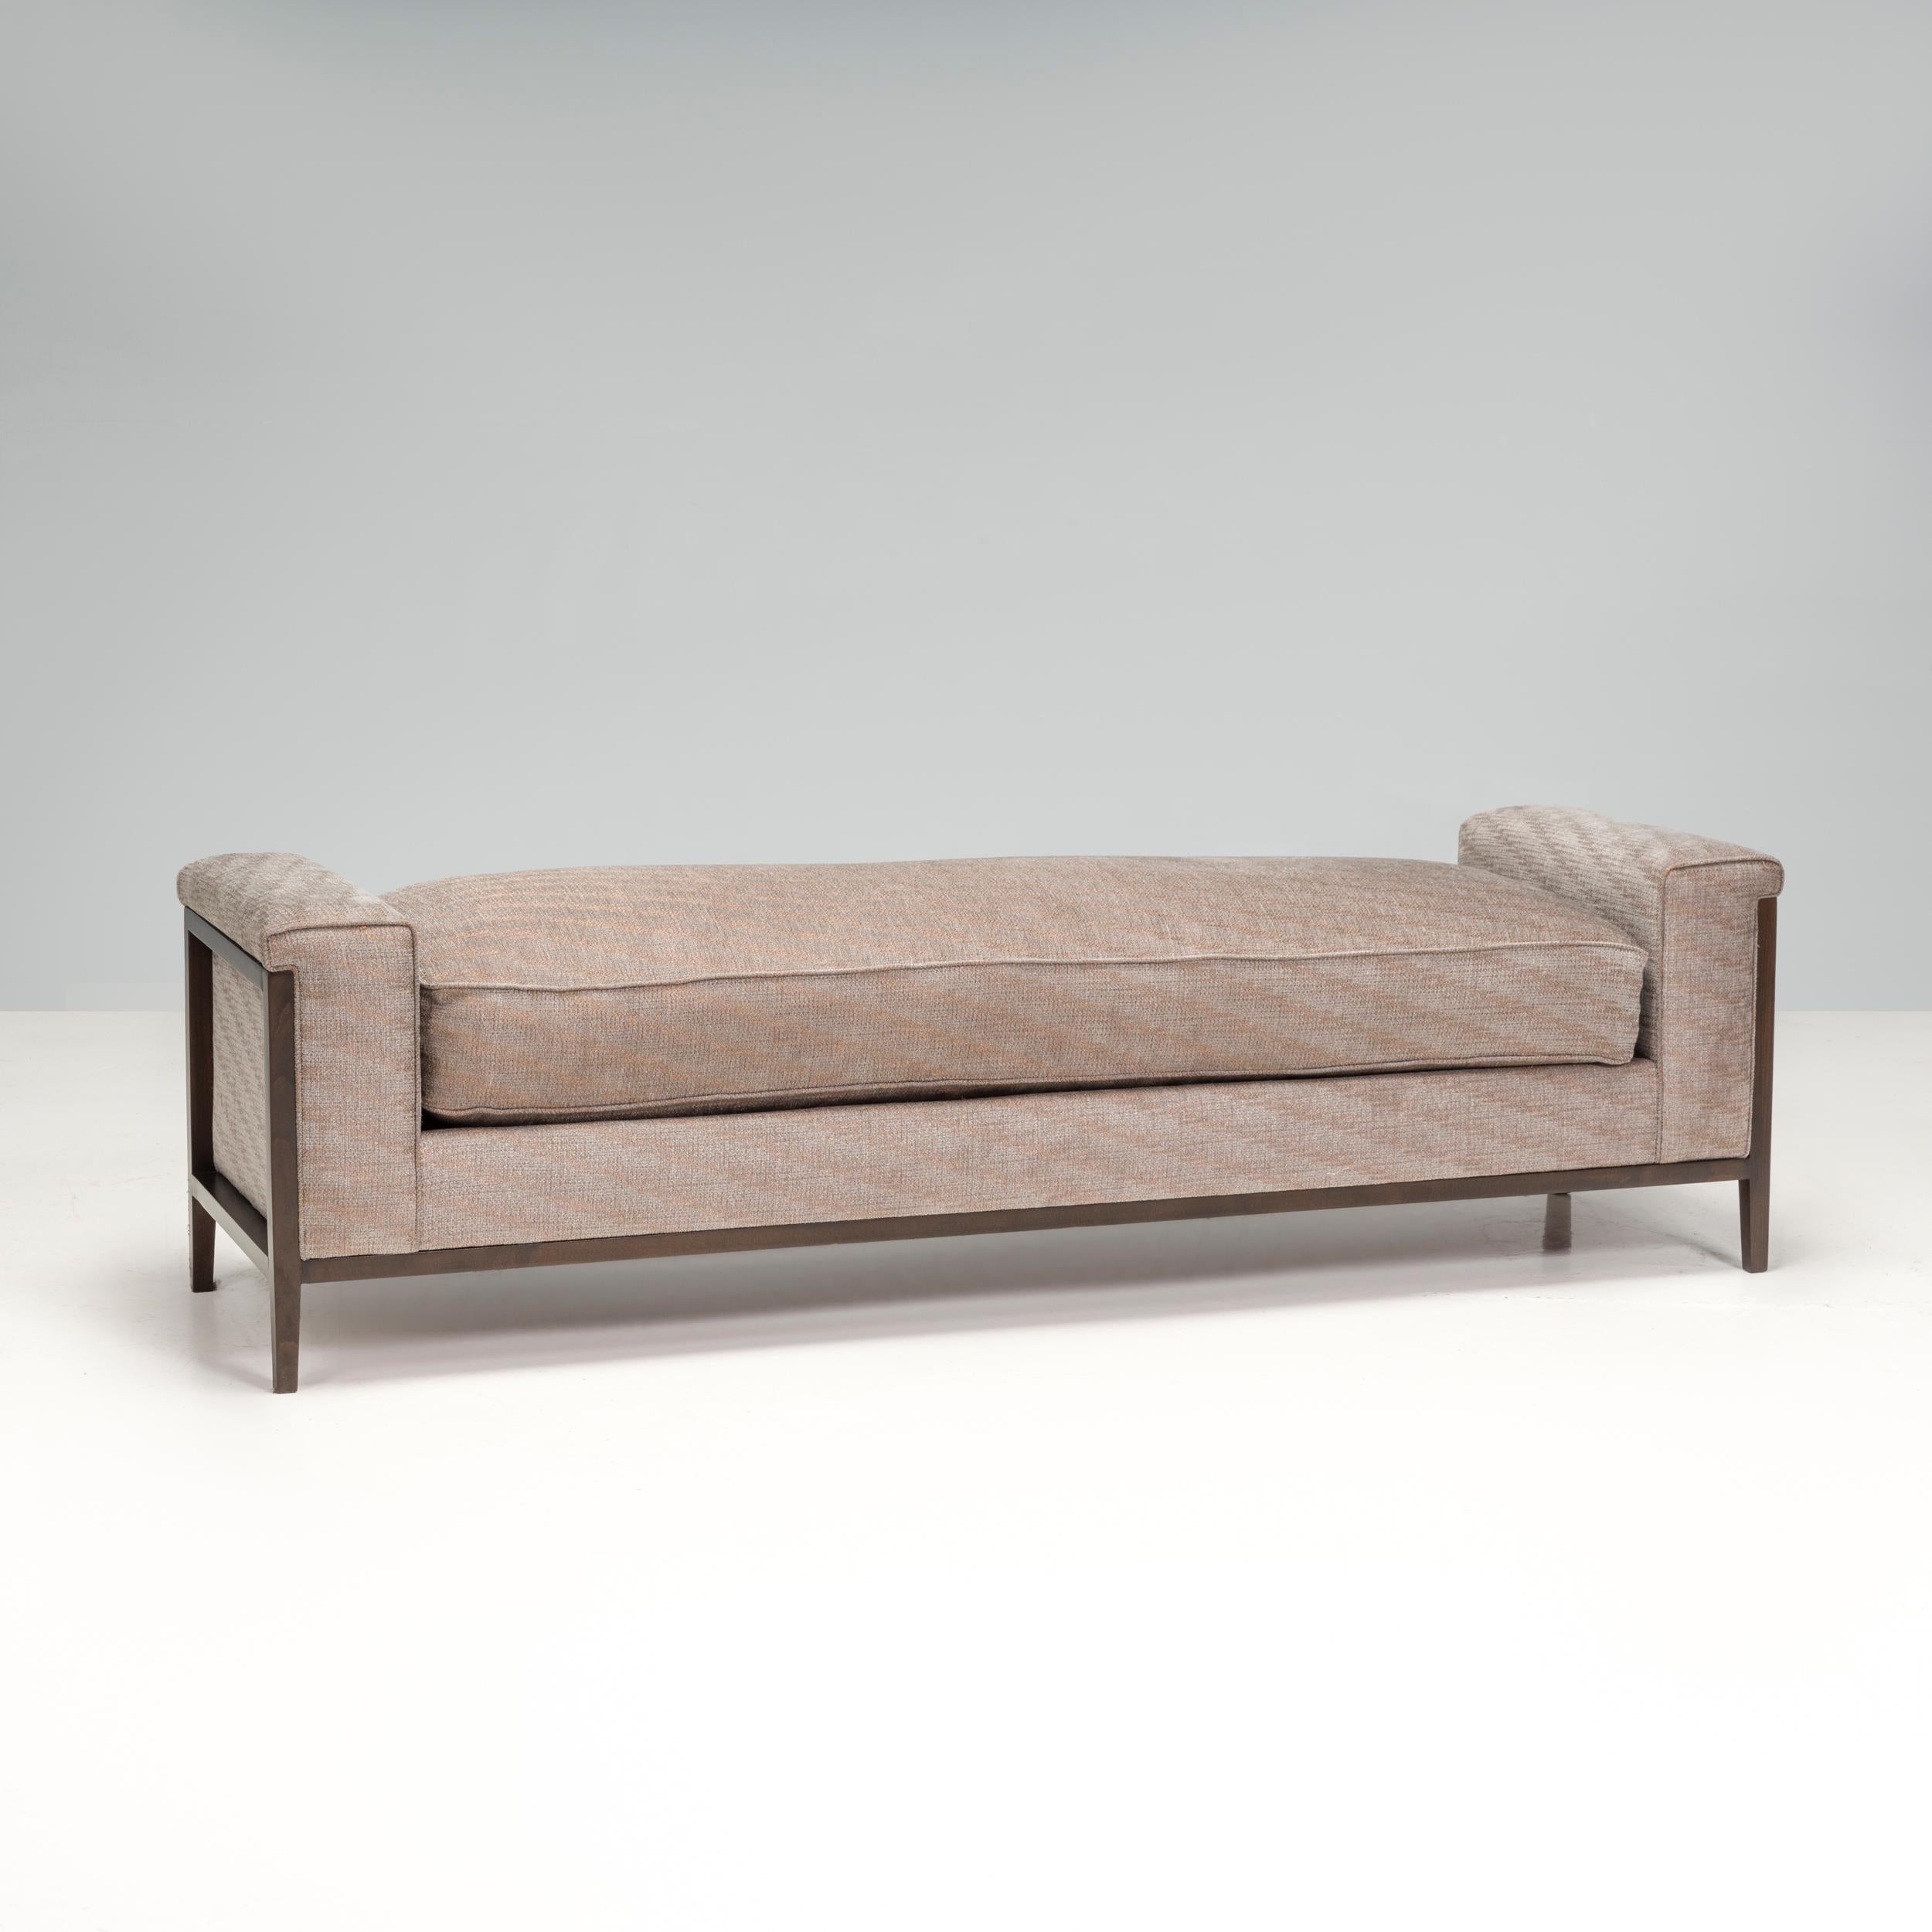 The Grey Upholstered Bench features a streamlined frame that sits elevated above a carved wood framing that is light and modern. This minimalist silhouette gives the piece a sense of refinement. The Grey Upholstered Bench makes a great anchor in the